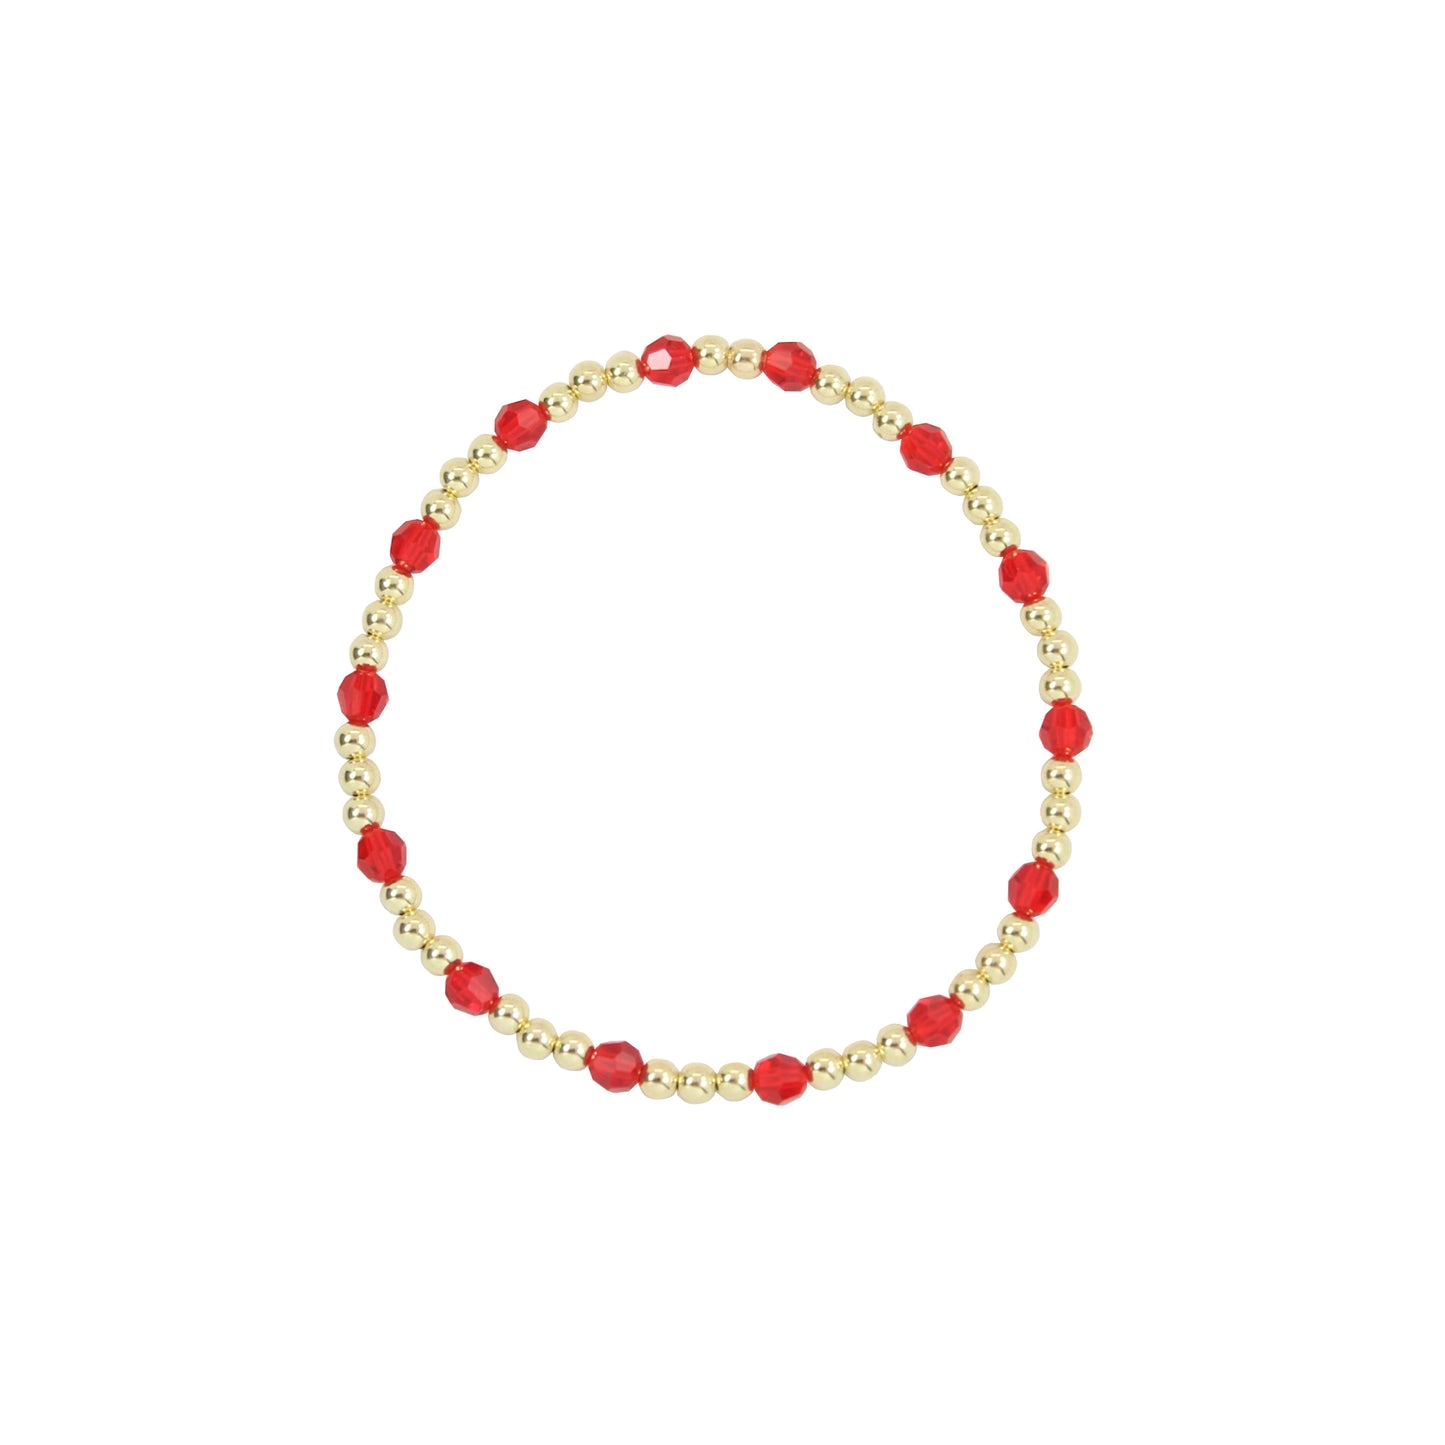 Stretchy July Birthstone Adult Dotted Bracelet (3MM + 4MM beads)